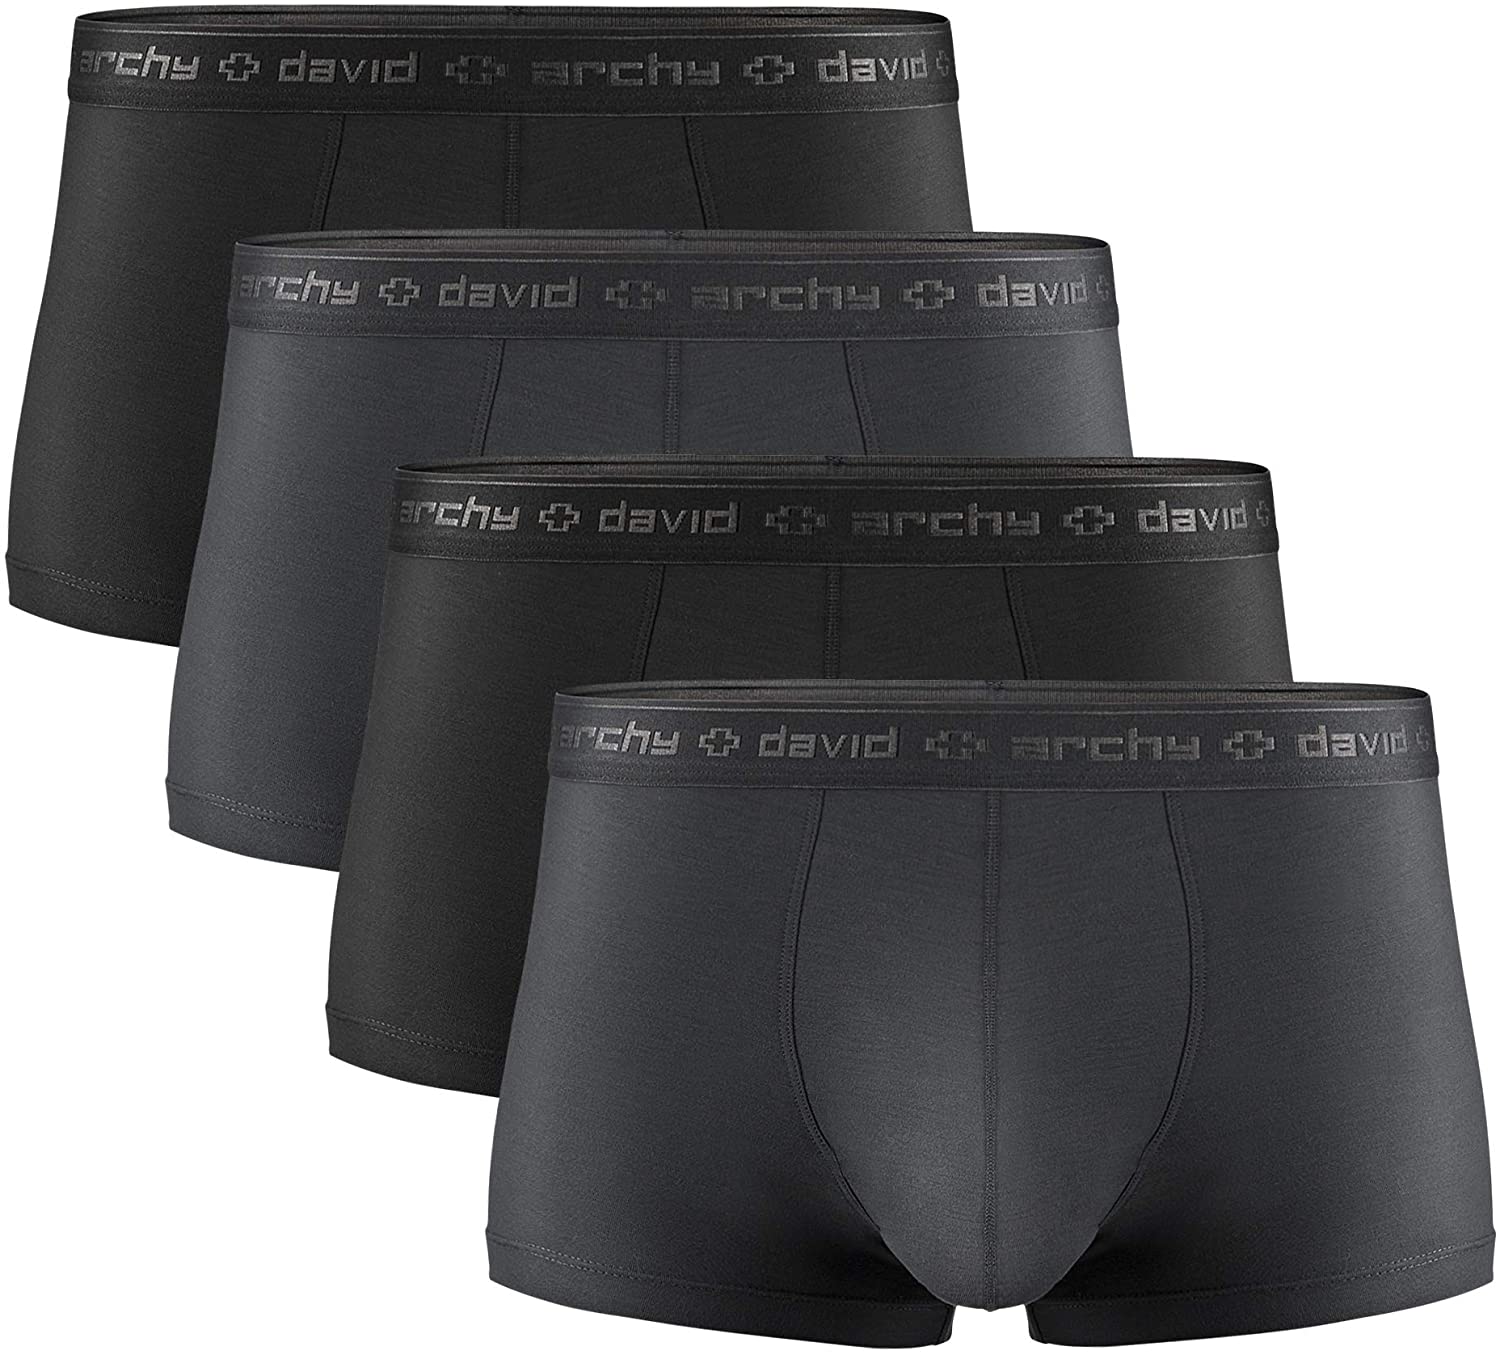 DAVID ARCHY Men's Dual Pouch Underwear Micro Modal Trunks Separate Pouches  with